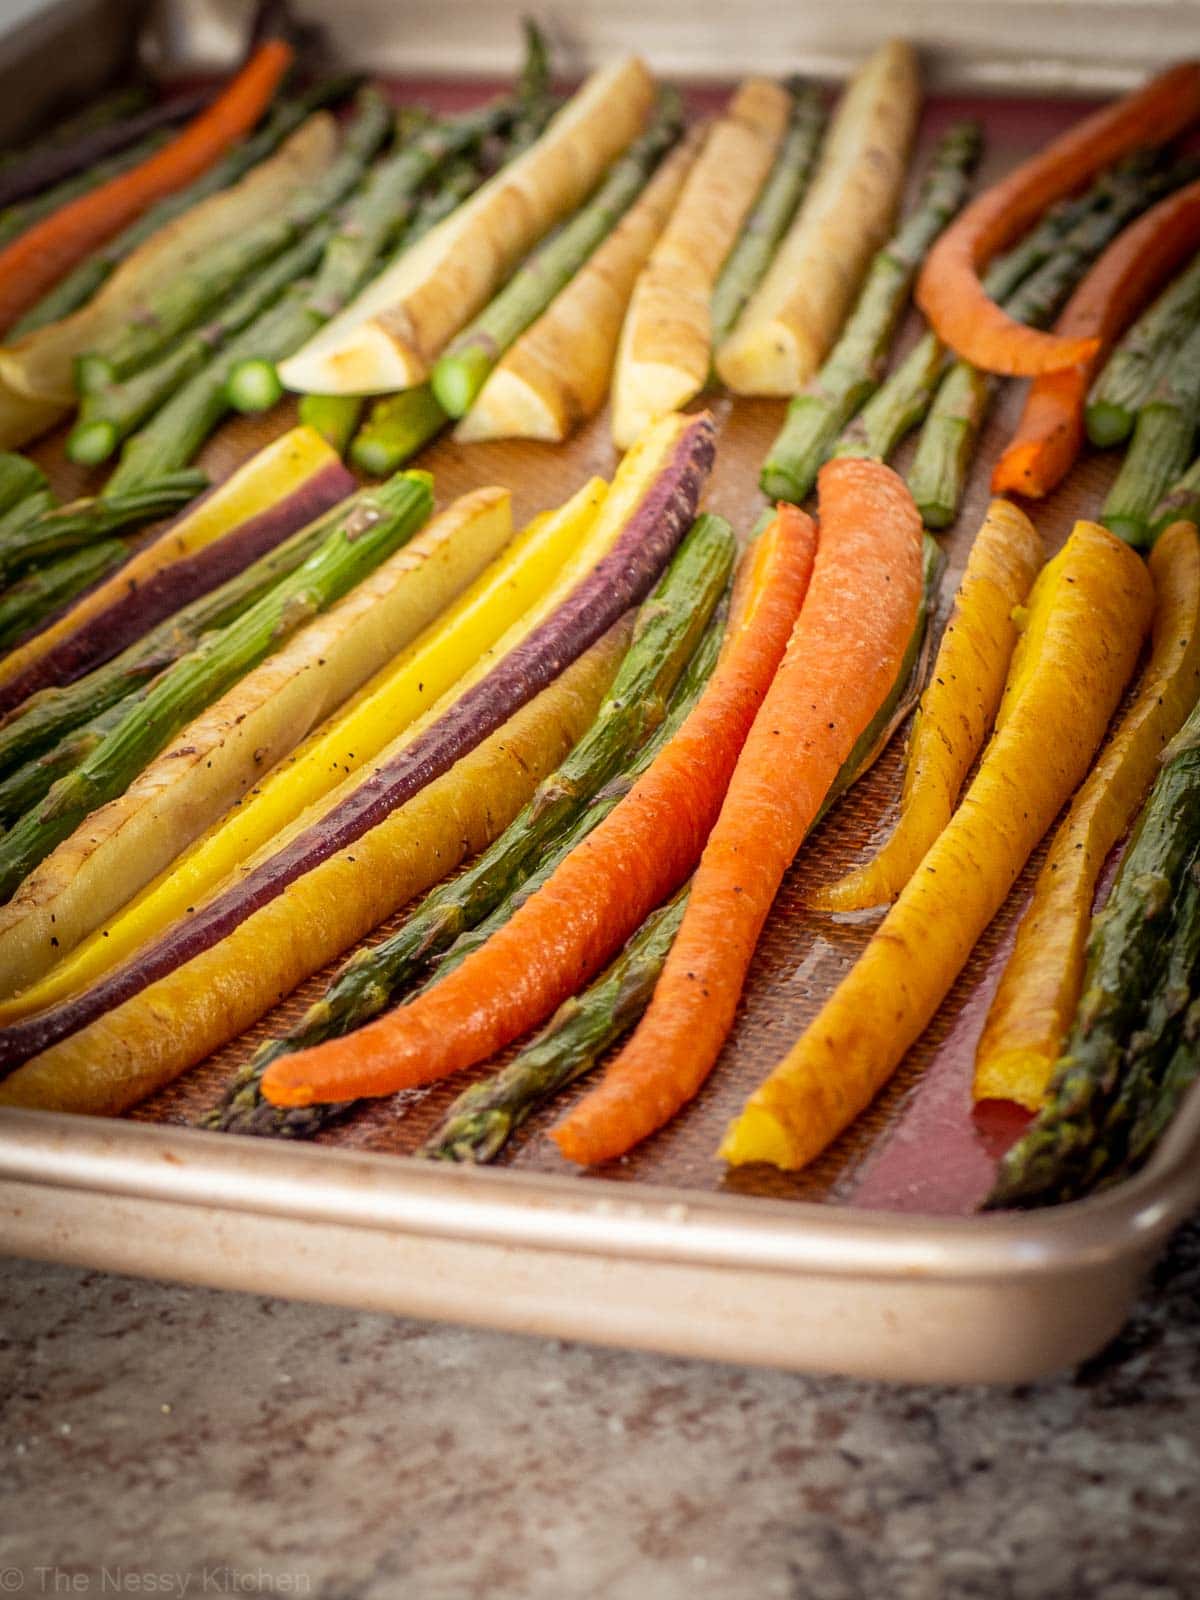 Multi colored carrots and asparagus on a sheet pan.